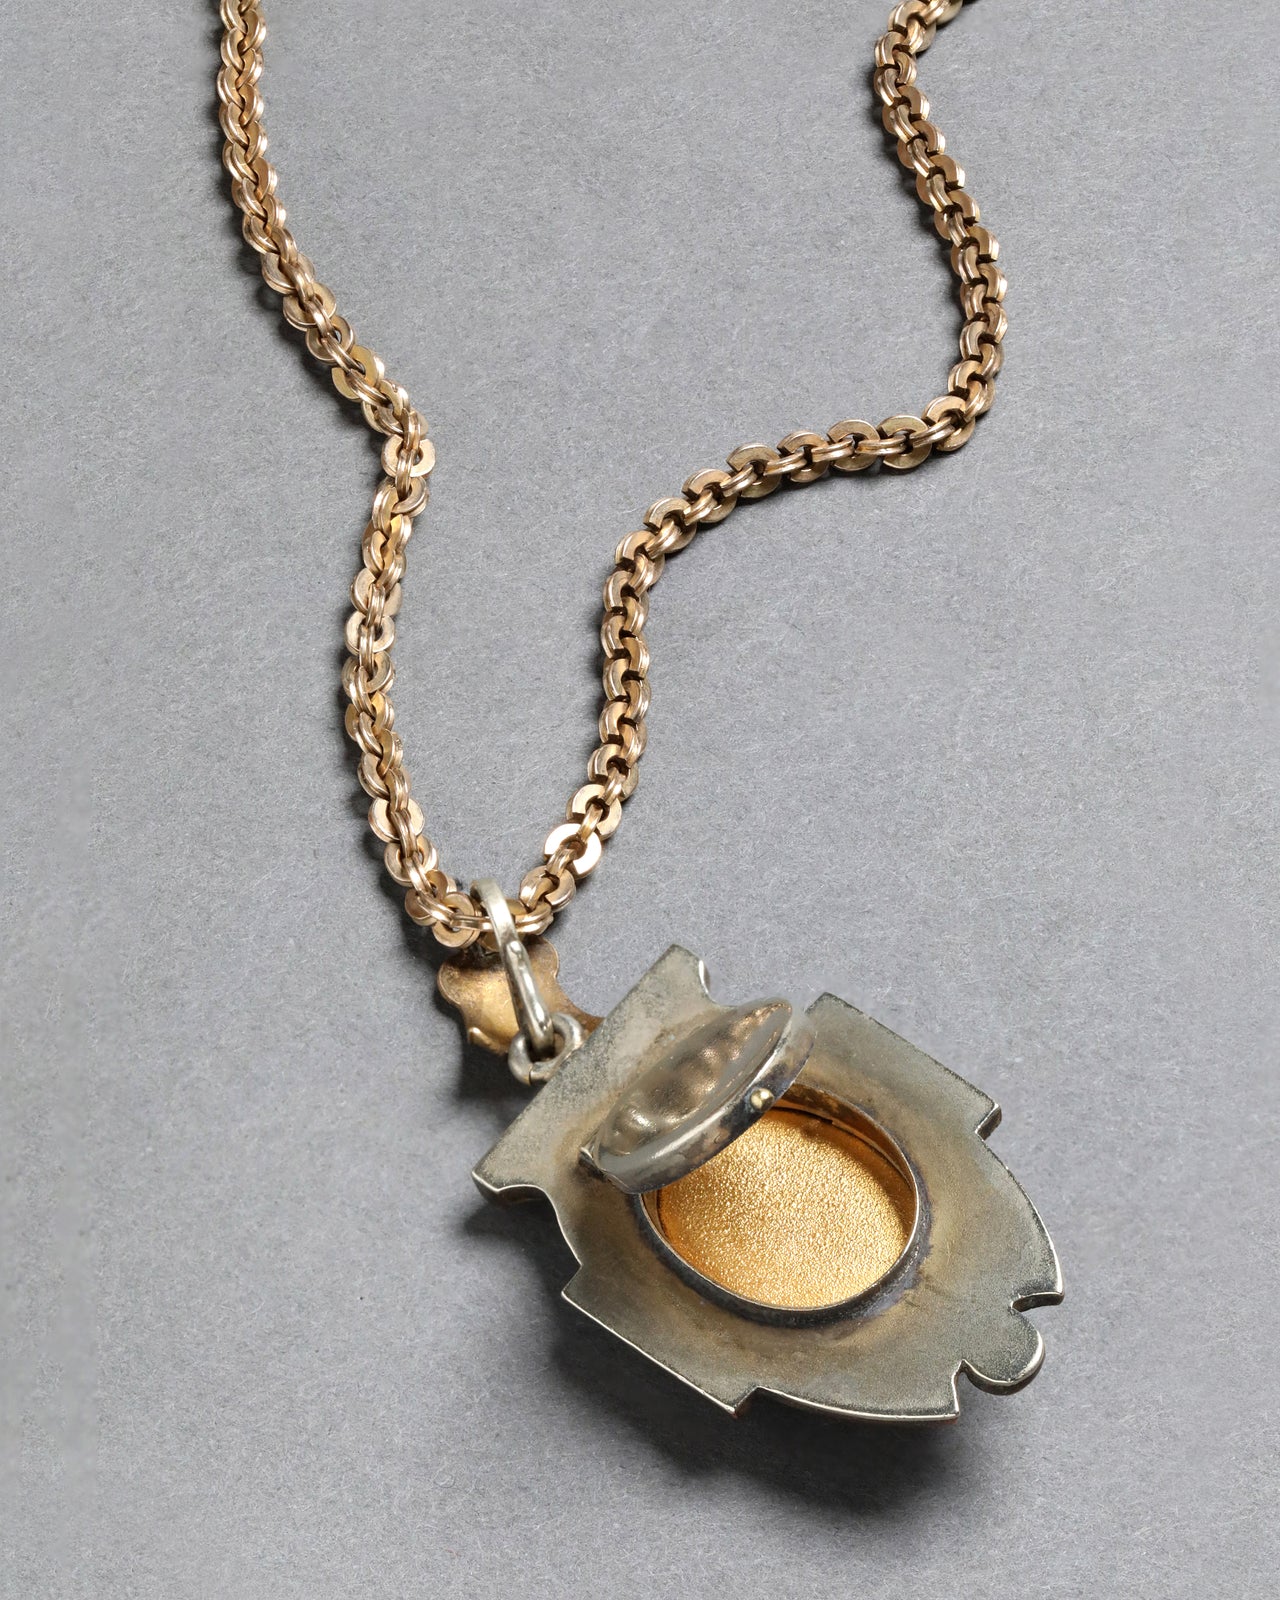 Antique Gold Filled Revival Locket Necklace with Seed Pearl - Photo 2